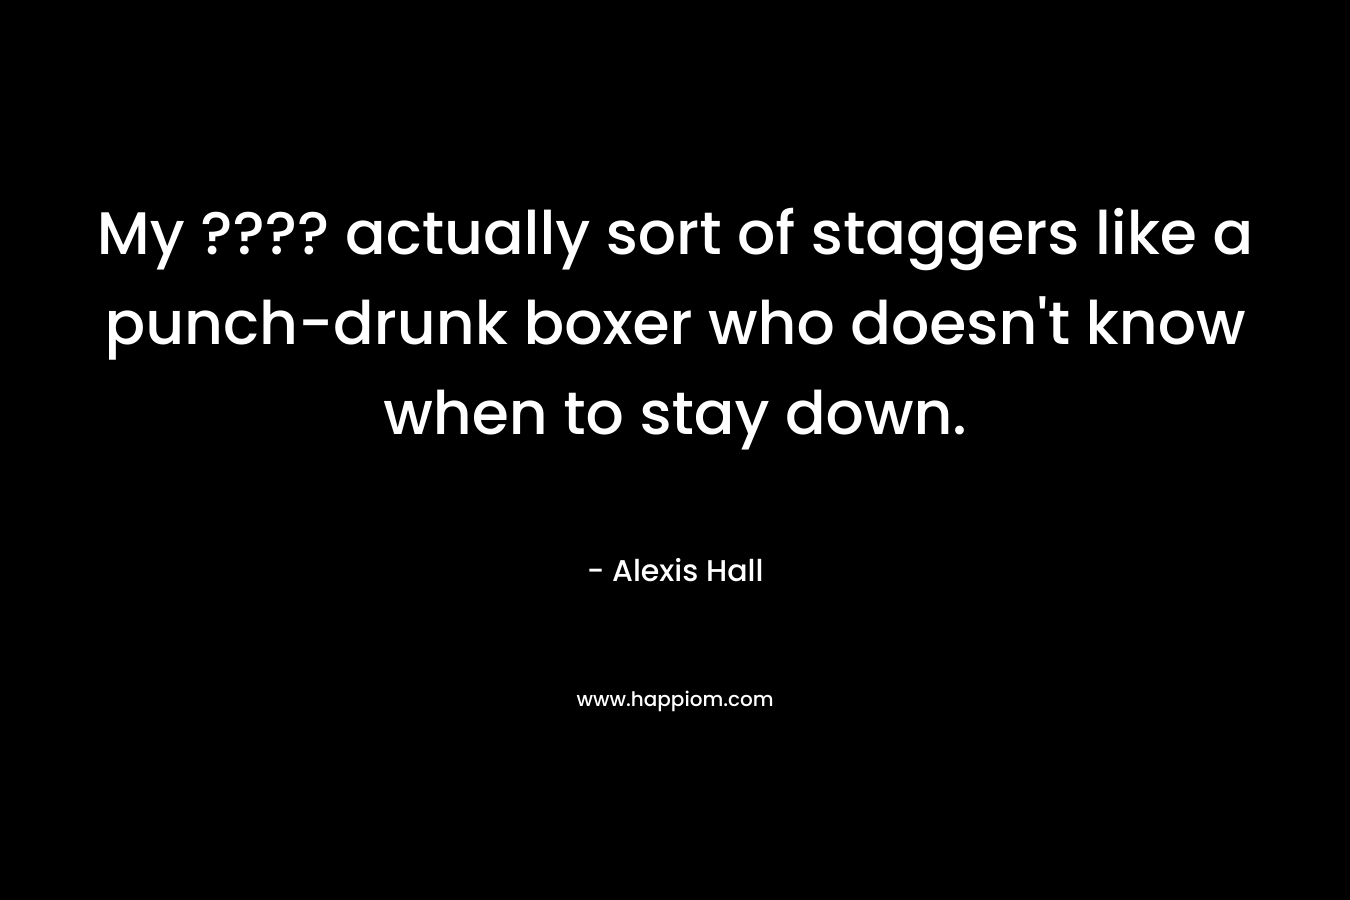 My ???? actually sort of staggers like a punch-drunk boxer who doesn't know when to stay down.